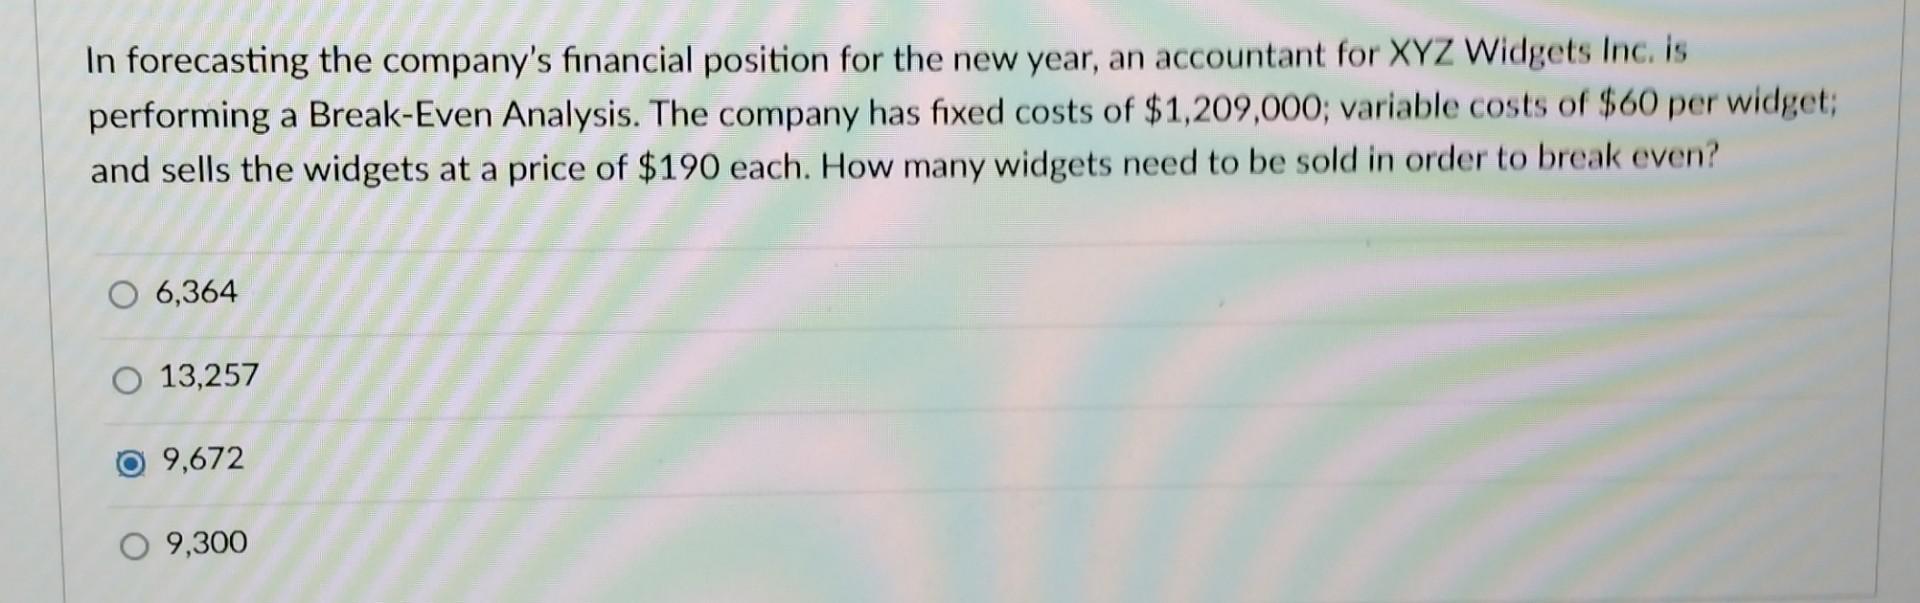 In forecasting the company's financial position for the new year, an accountant for XYZ Widgets Inc. is